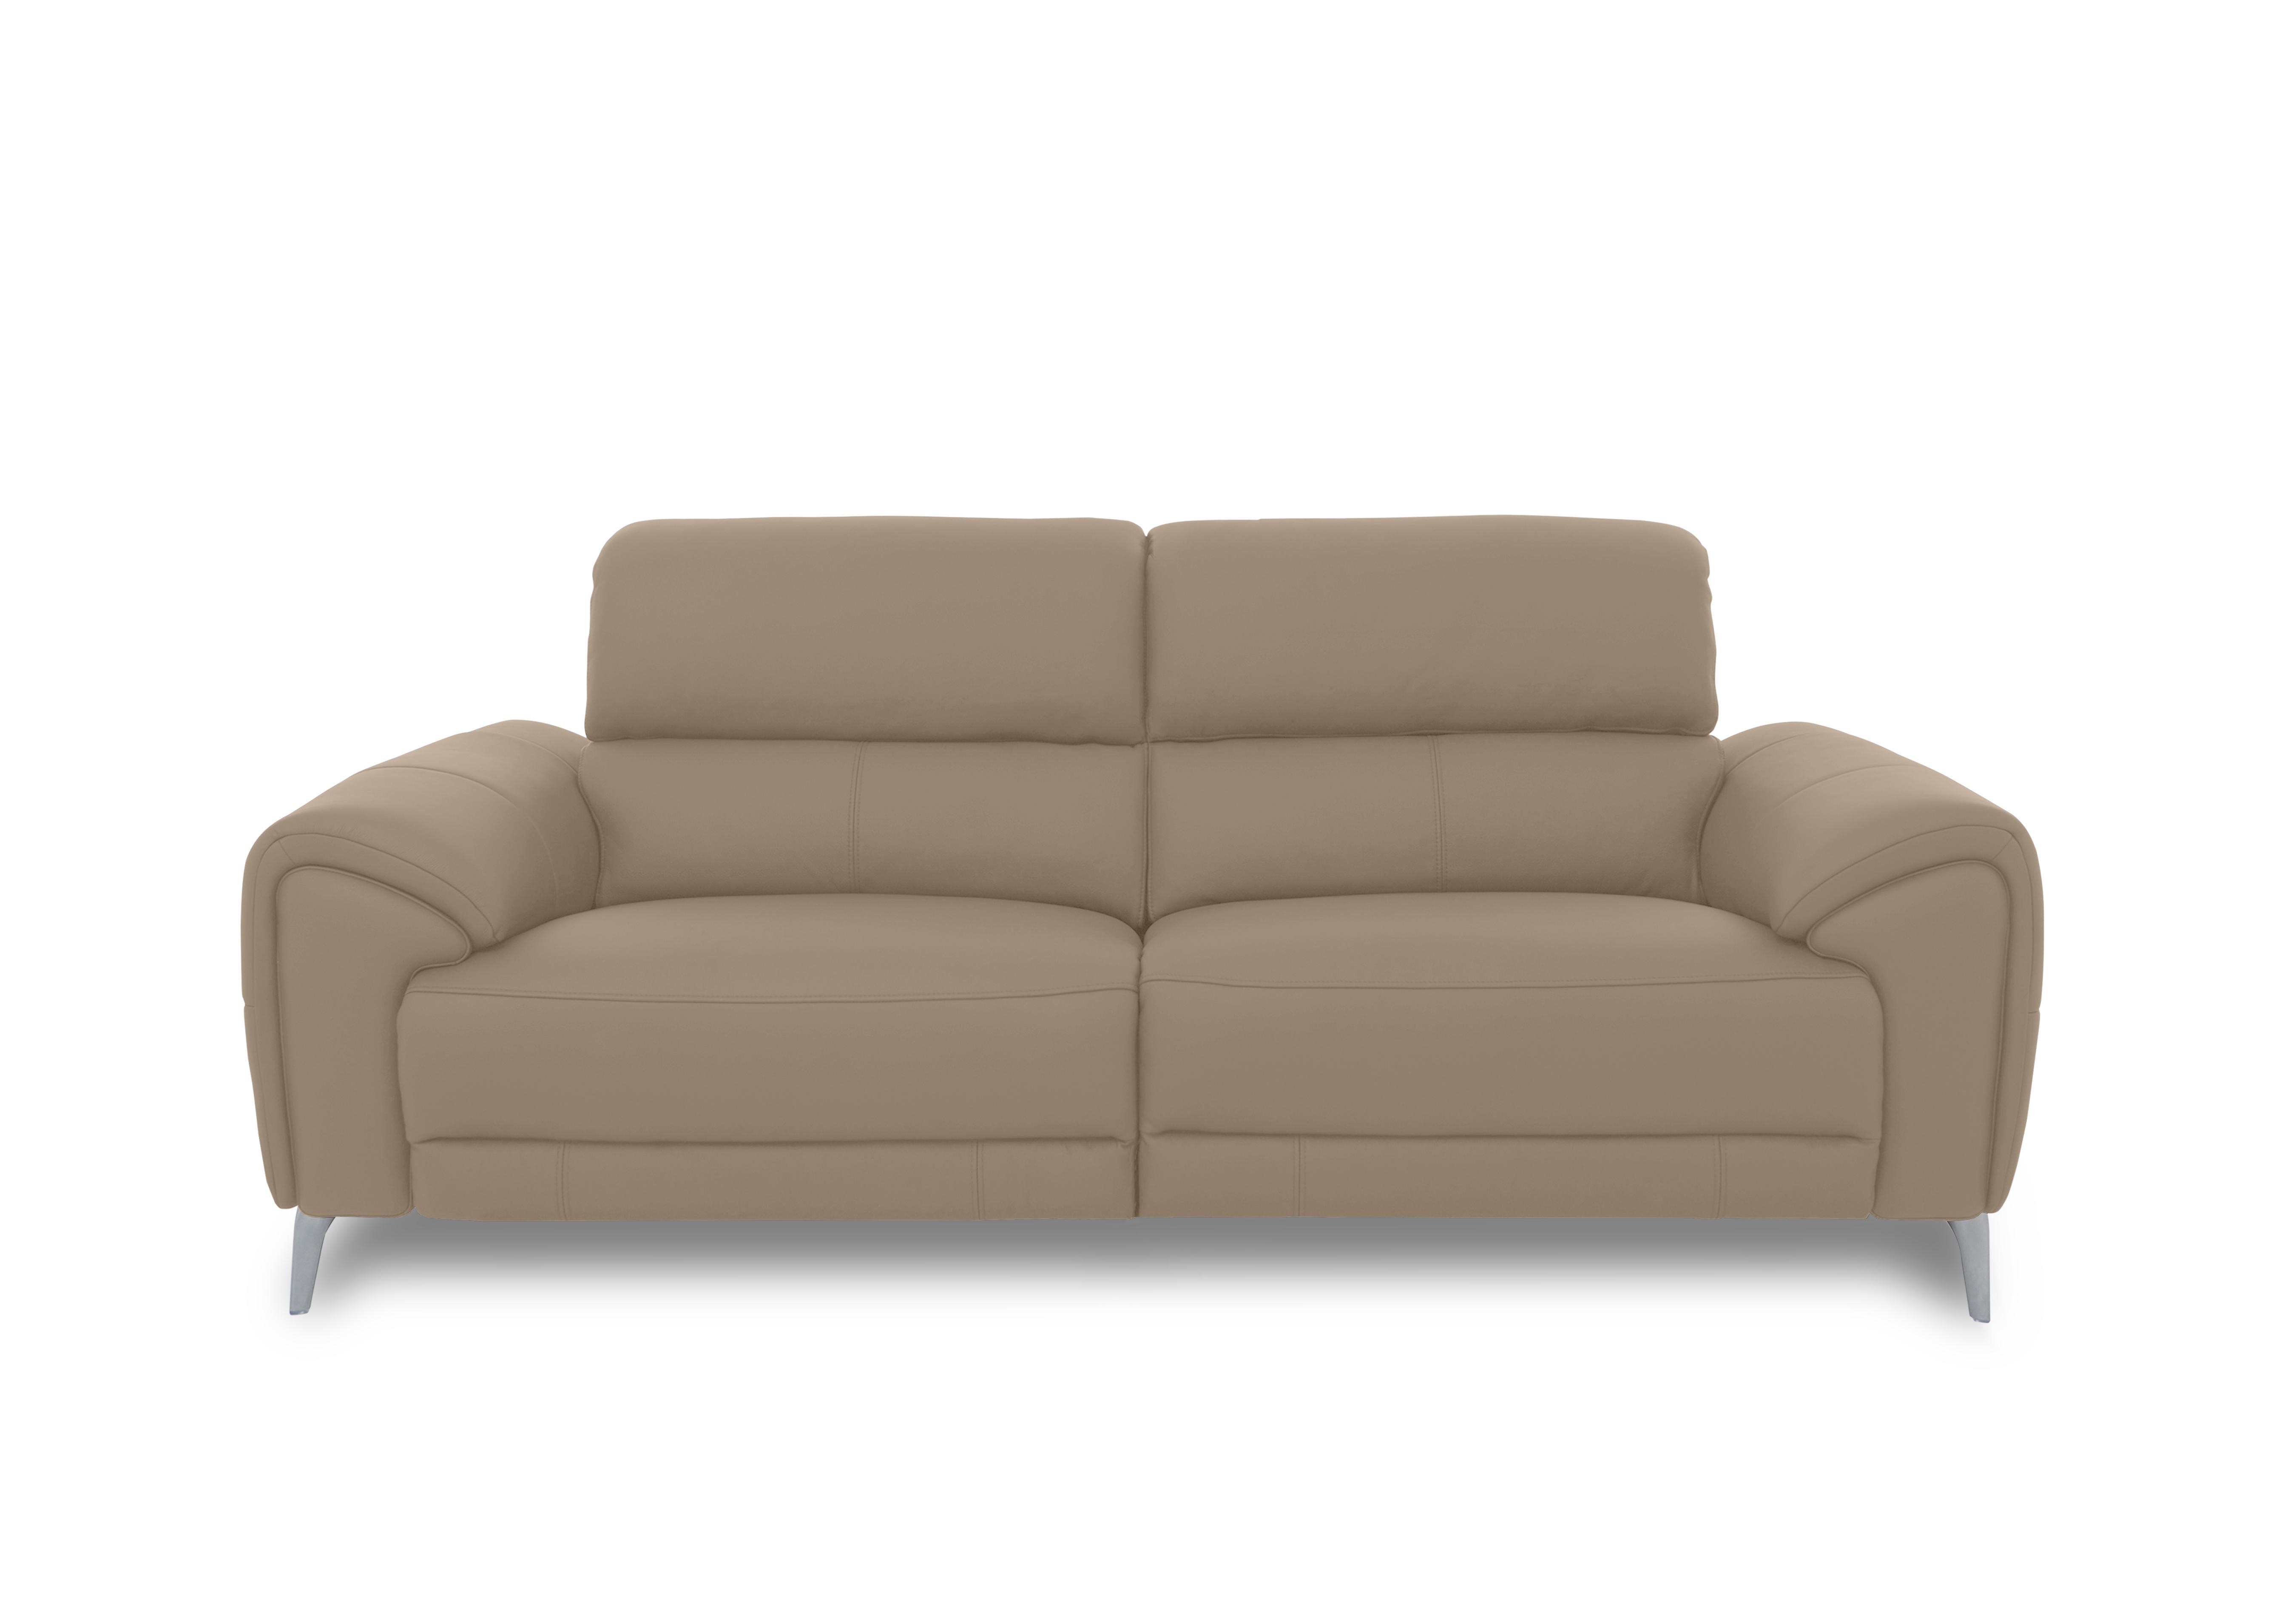 Vino Leather 3 Seater Power Recliner Sofa with Power Headrests and Heated Seats in Cat-60/06 Barley on Furniture Village